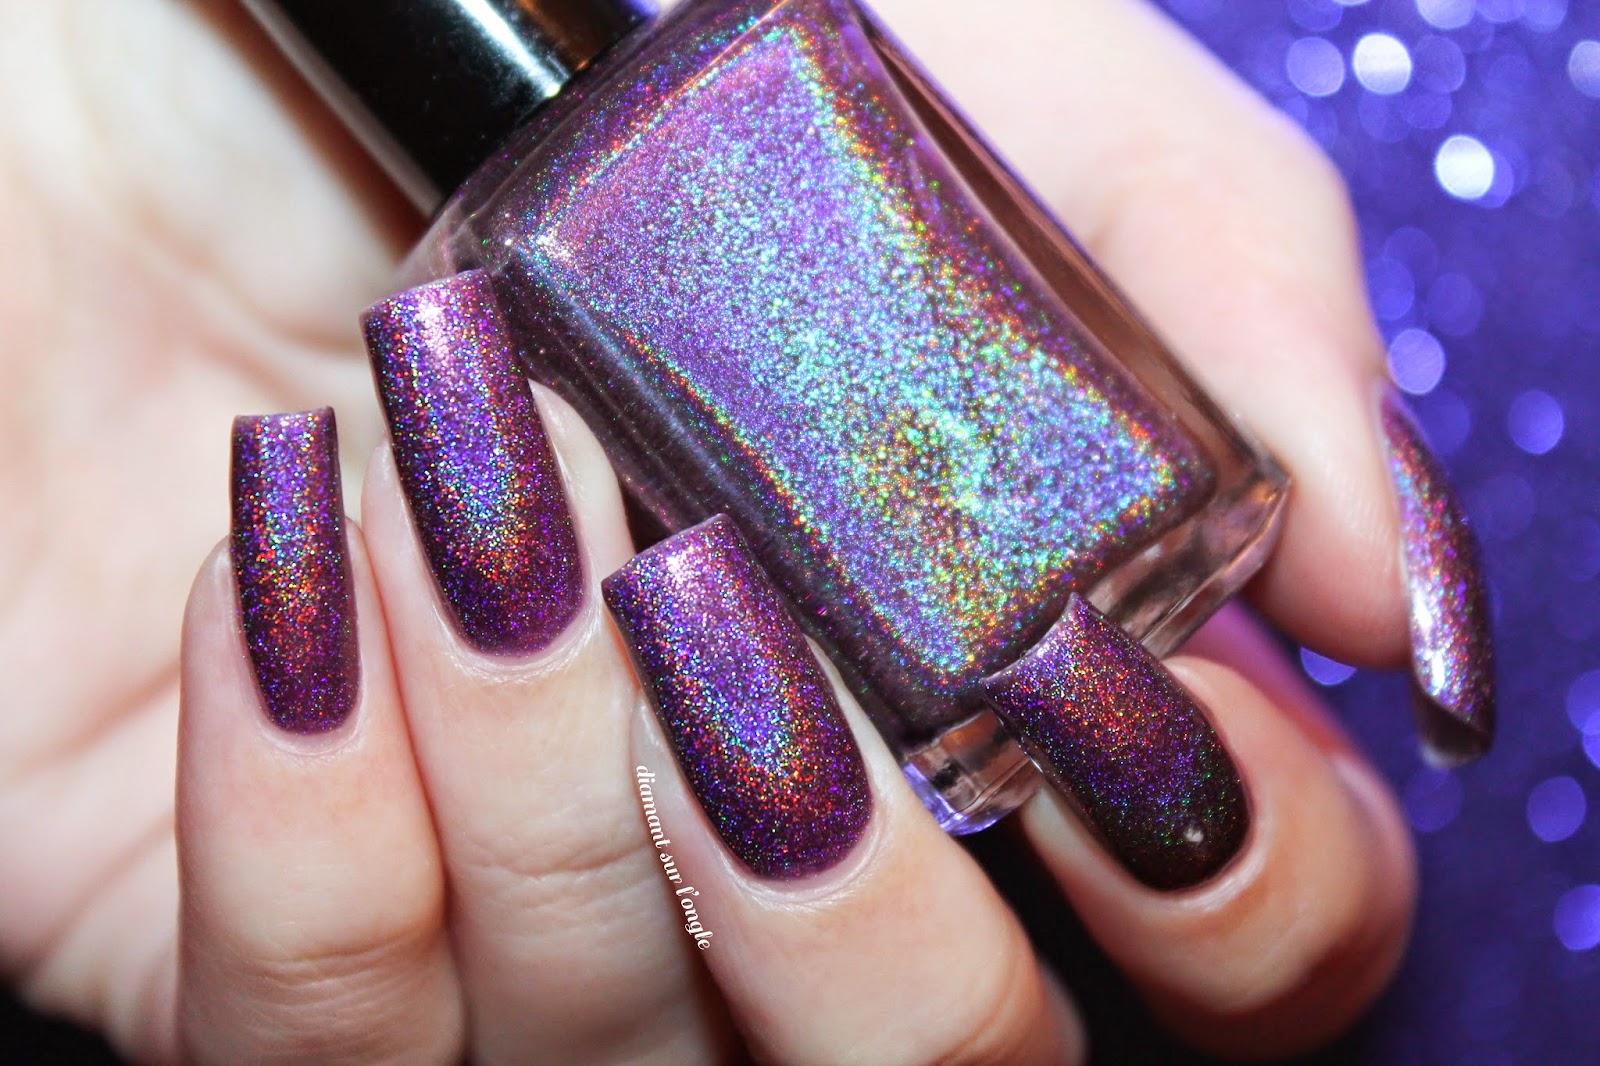 Swatch of April 2013 by Enchanted Polish